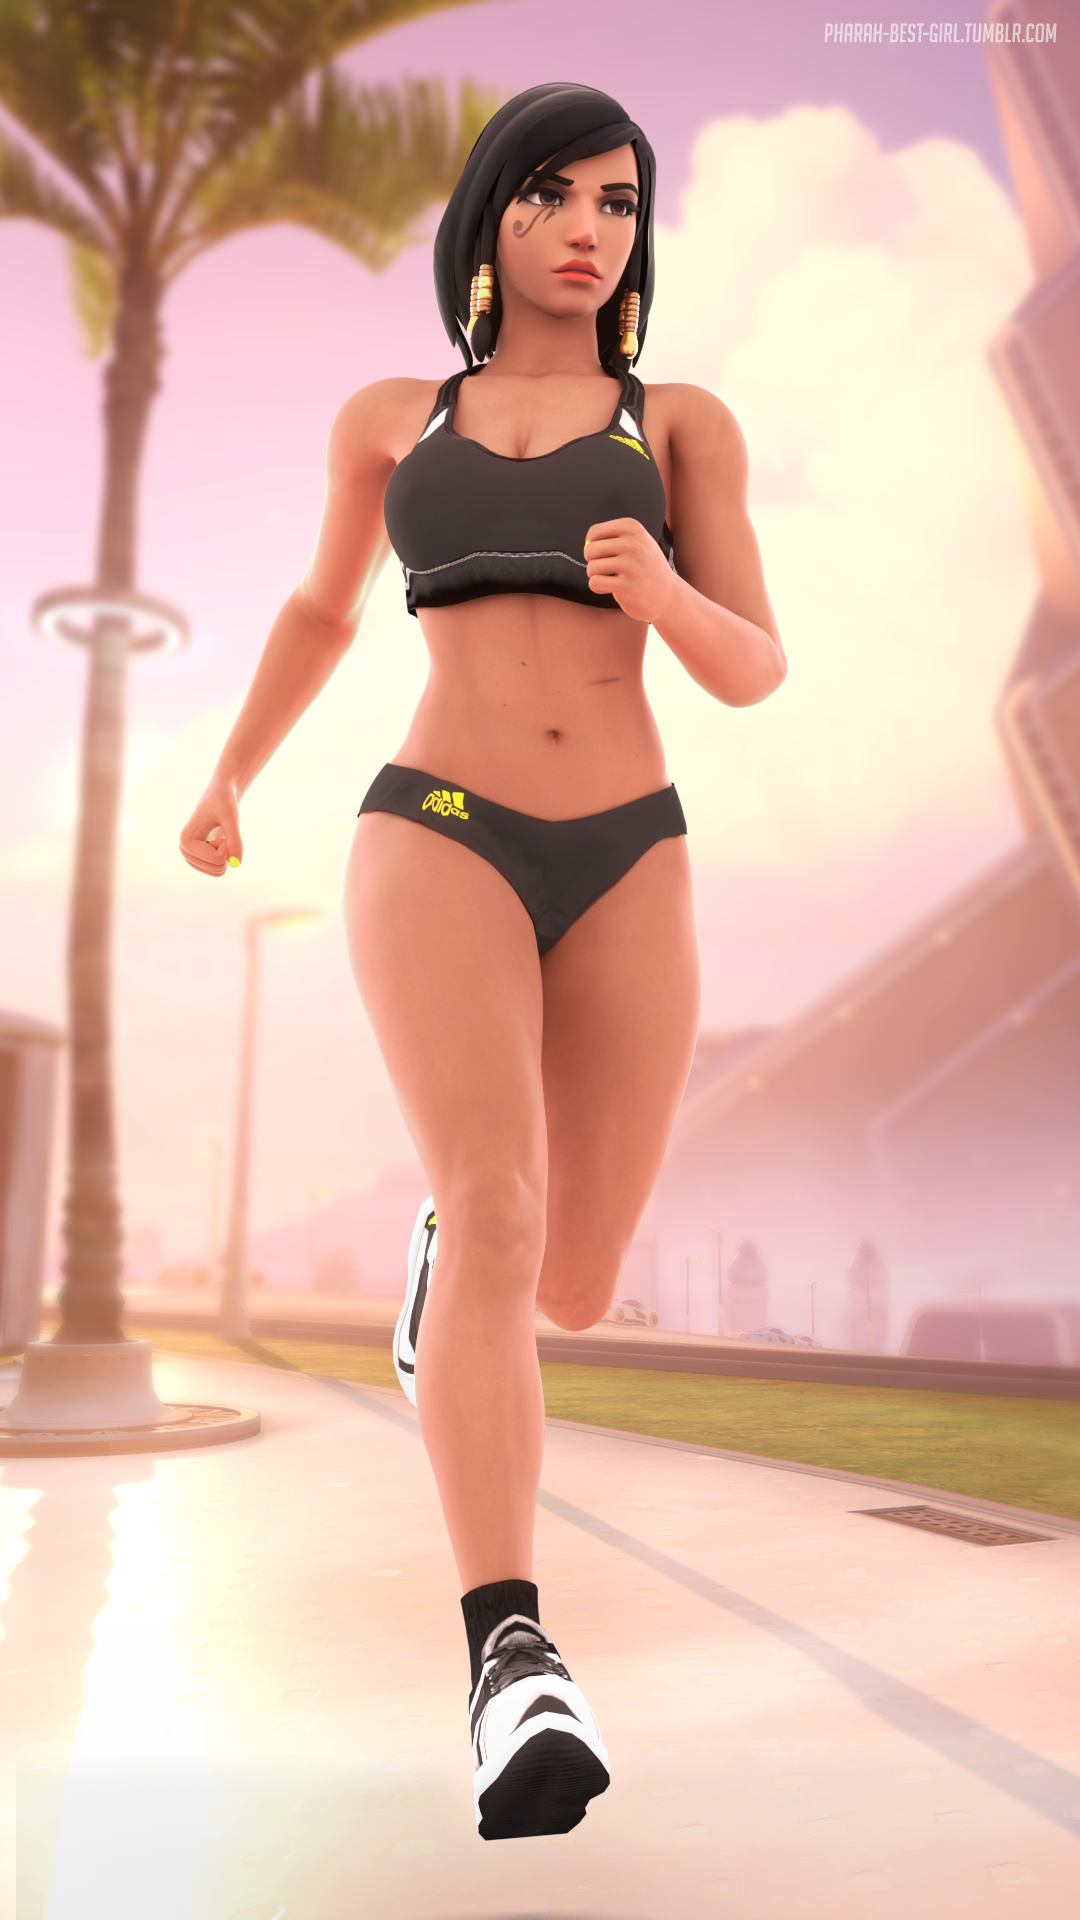 pharah-best-girl: Pharah out for some jogging Really digging this outfit Models: